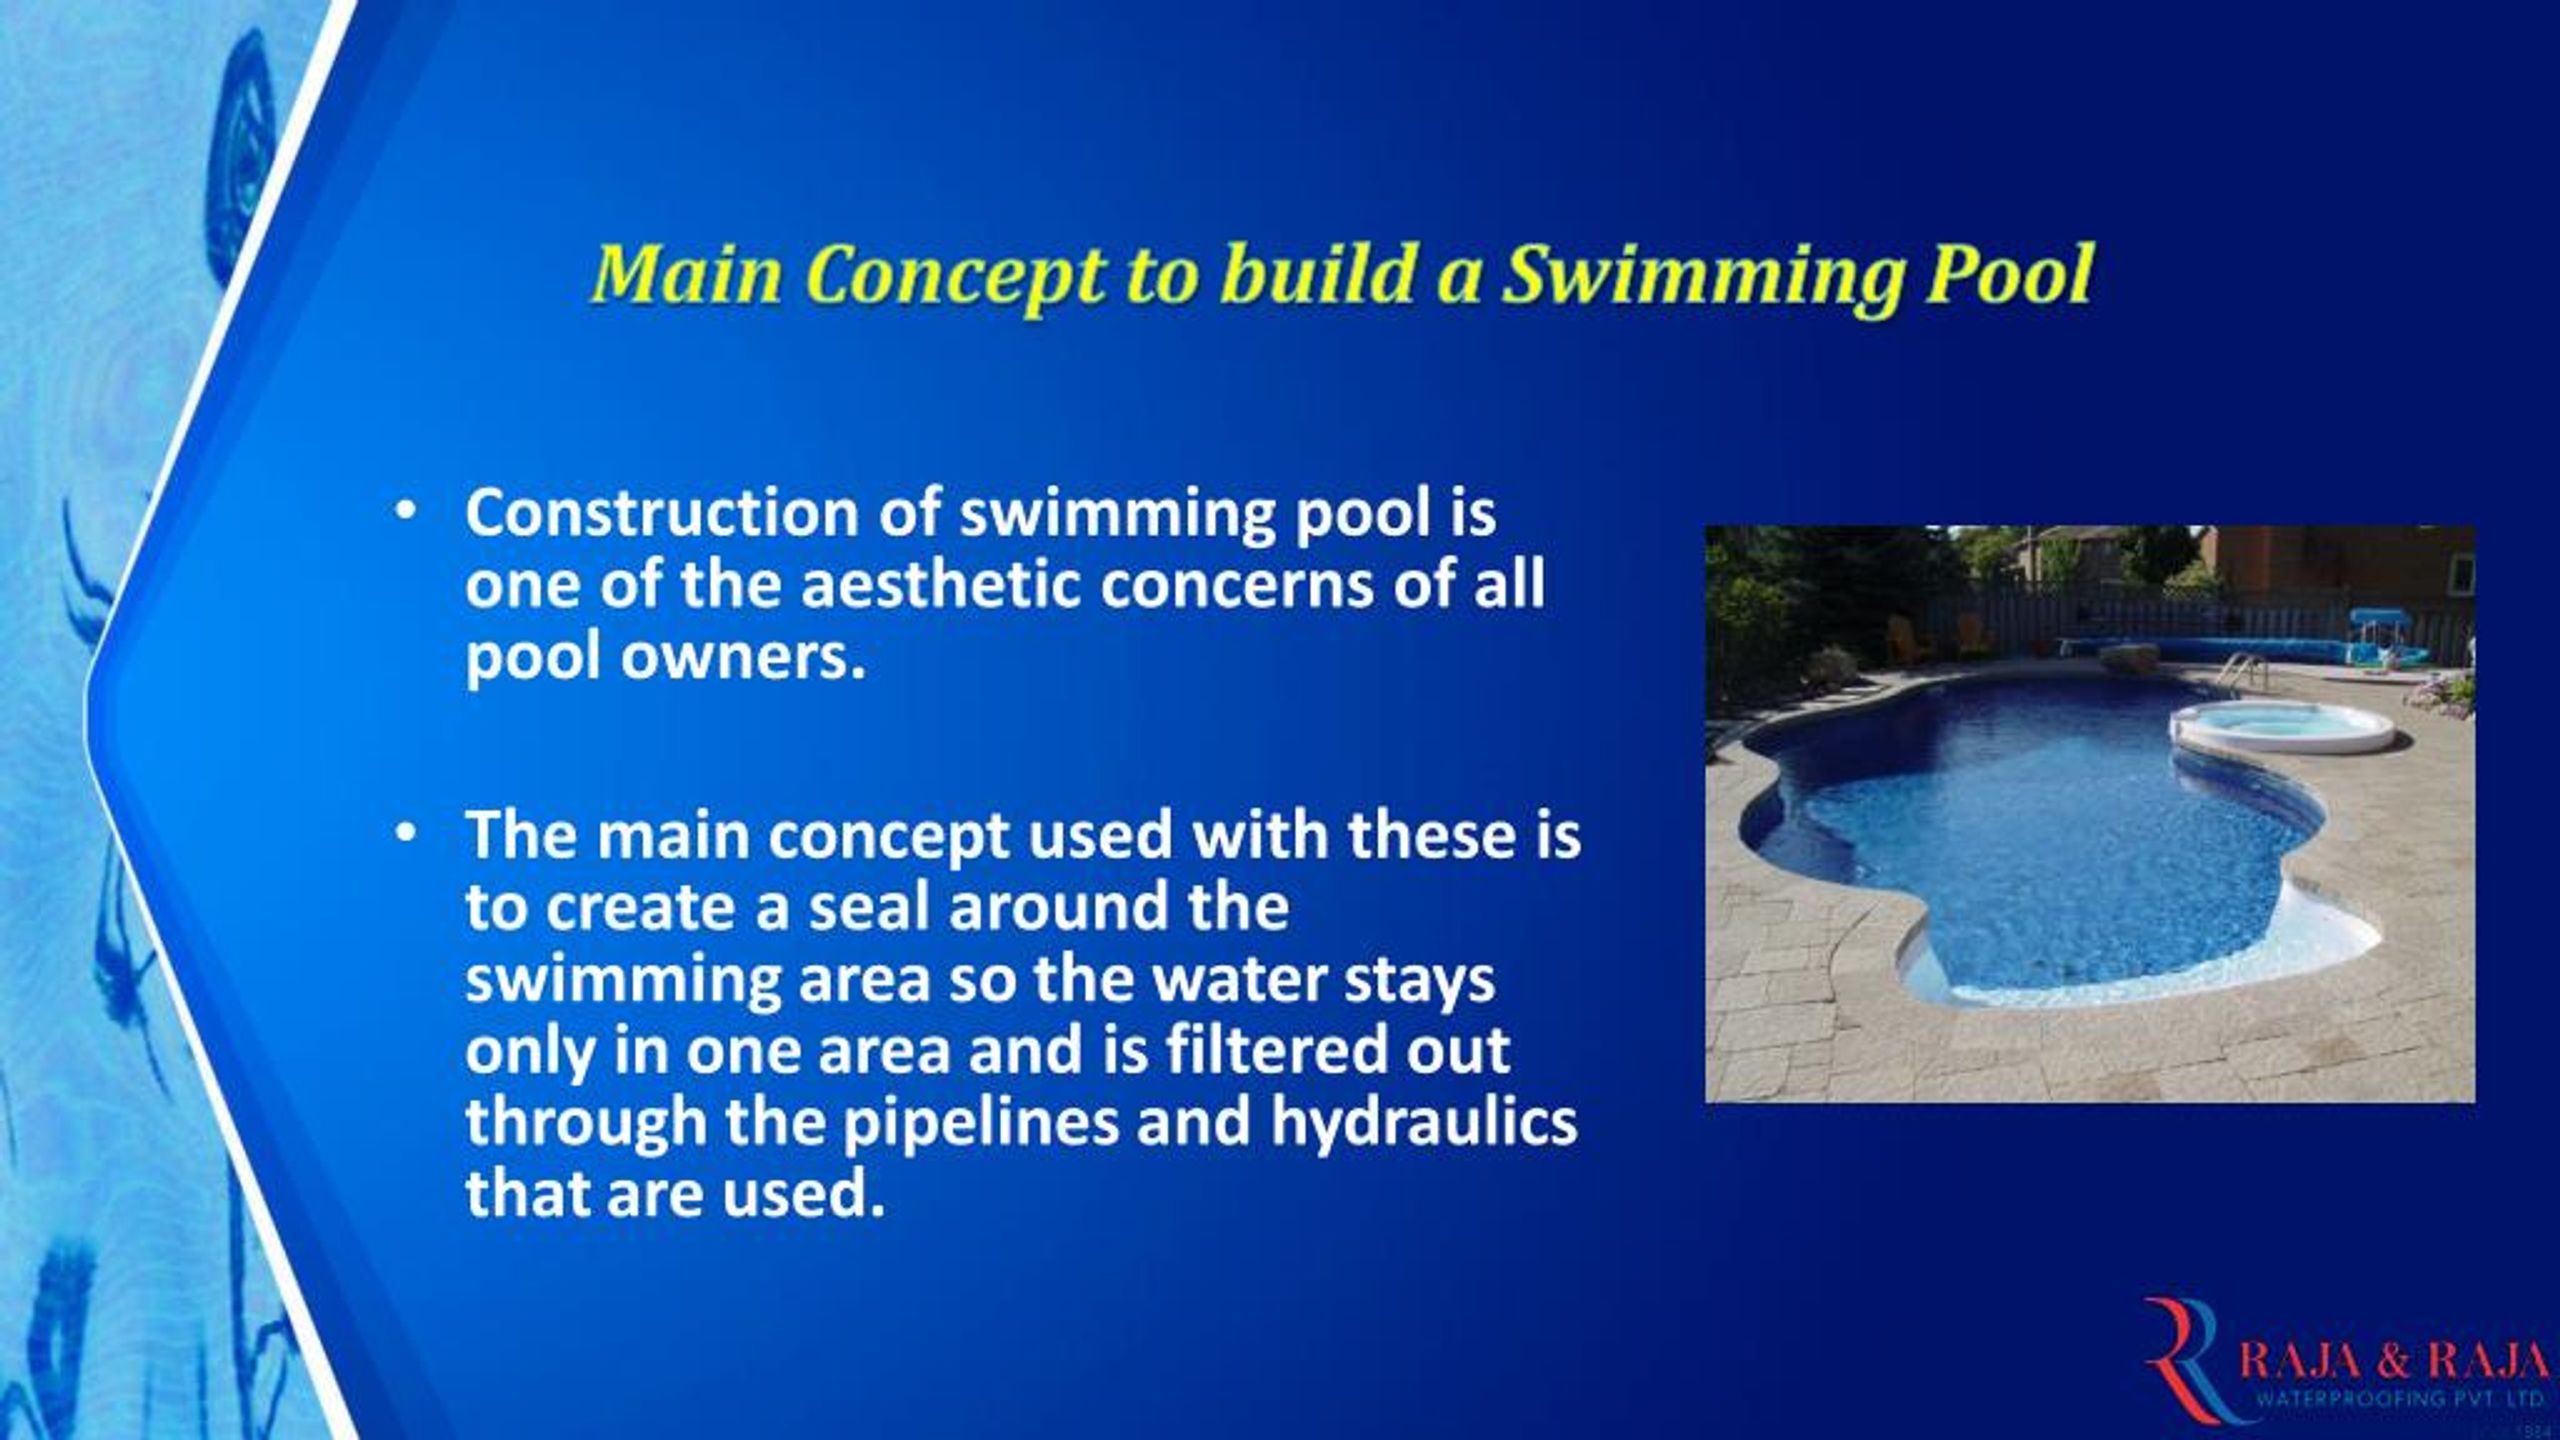 Ppt Swimming Pool Construction Services Powerpoint Presentation Free Id 7738436 - Diy Inground Pool Slideshare